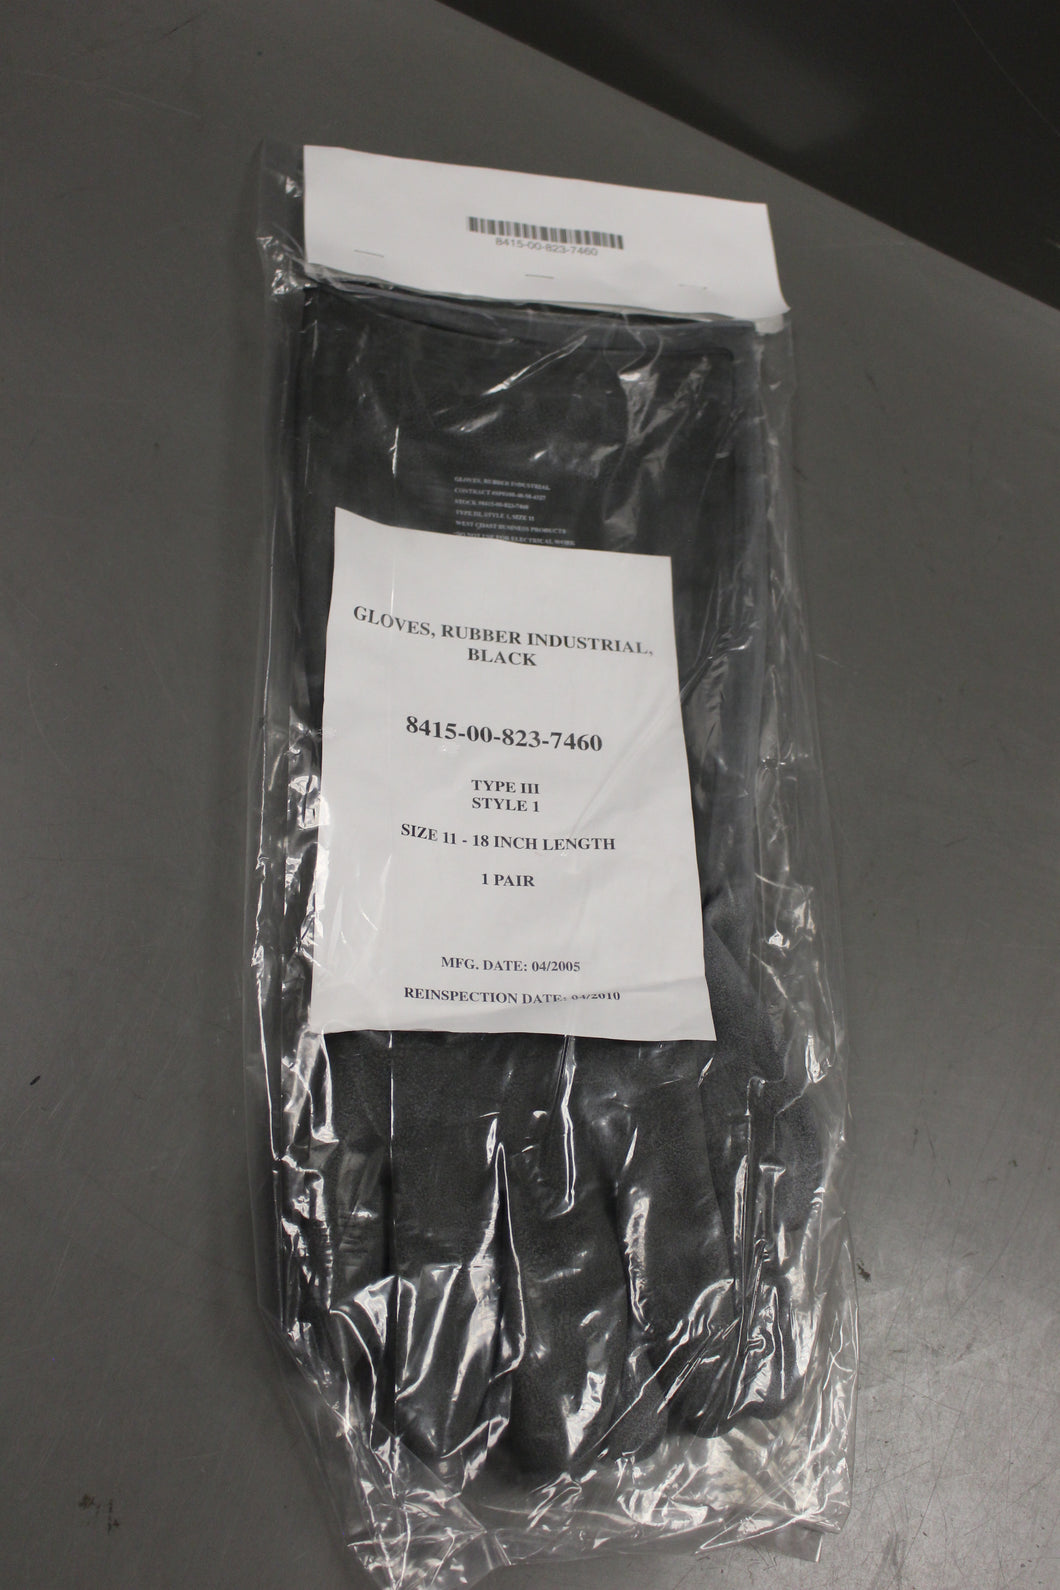 US Military Industrial Rubber Gloves, 8415-00-823-7460 Size: 11, Type 3, New!